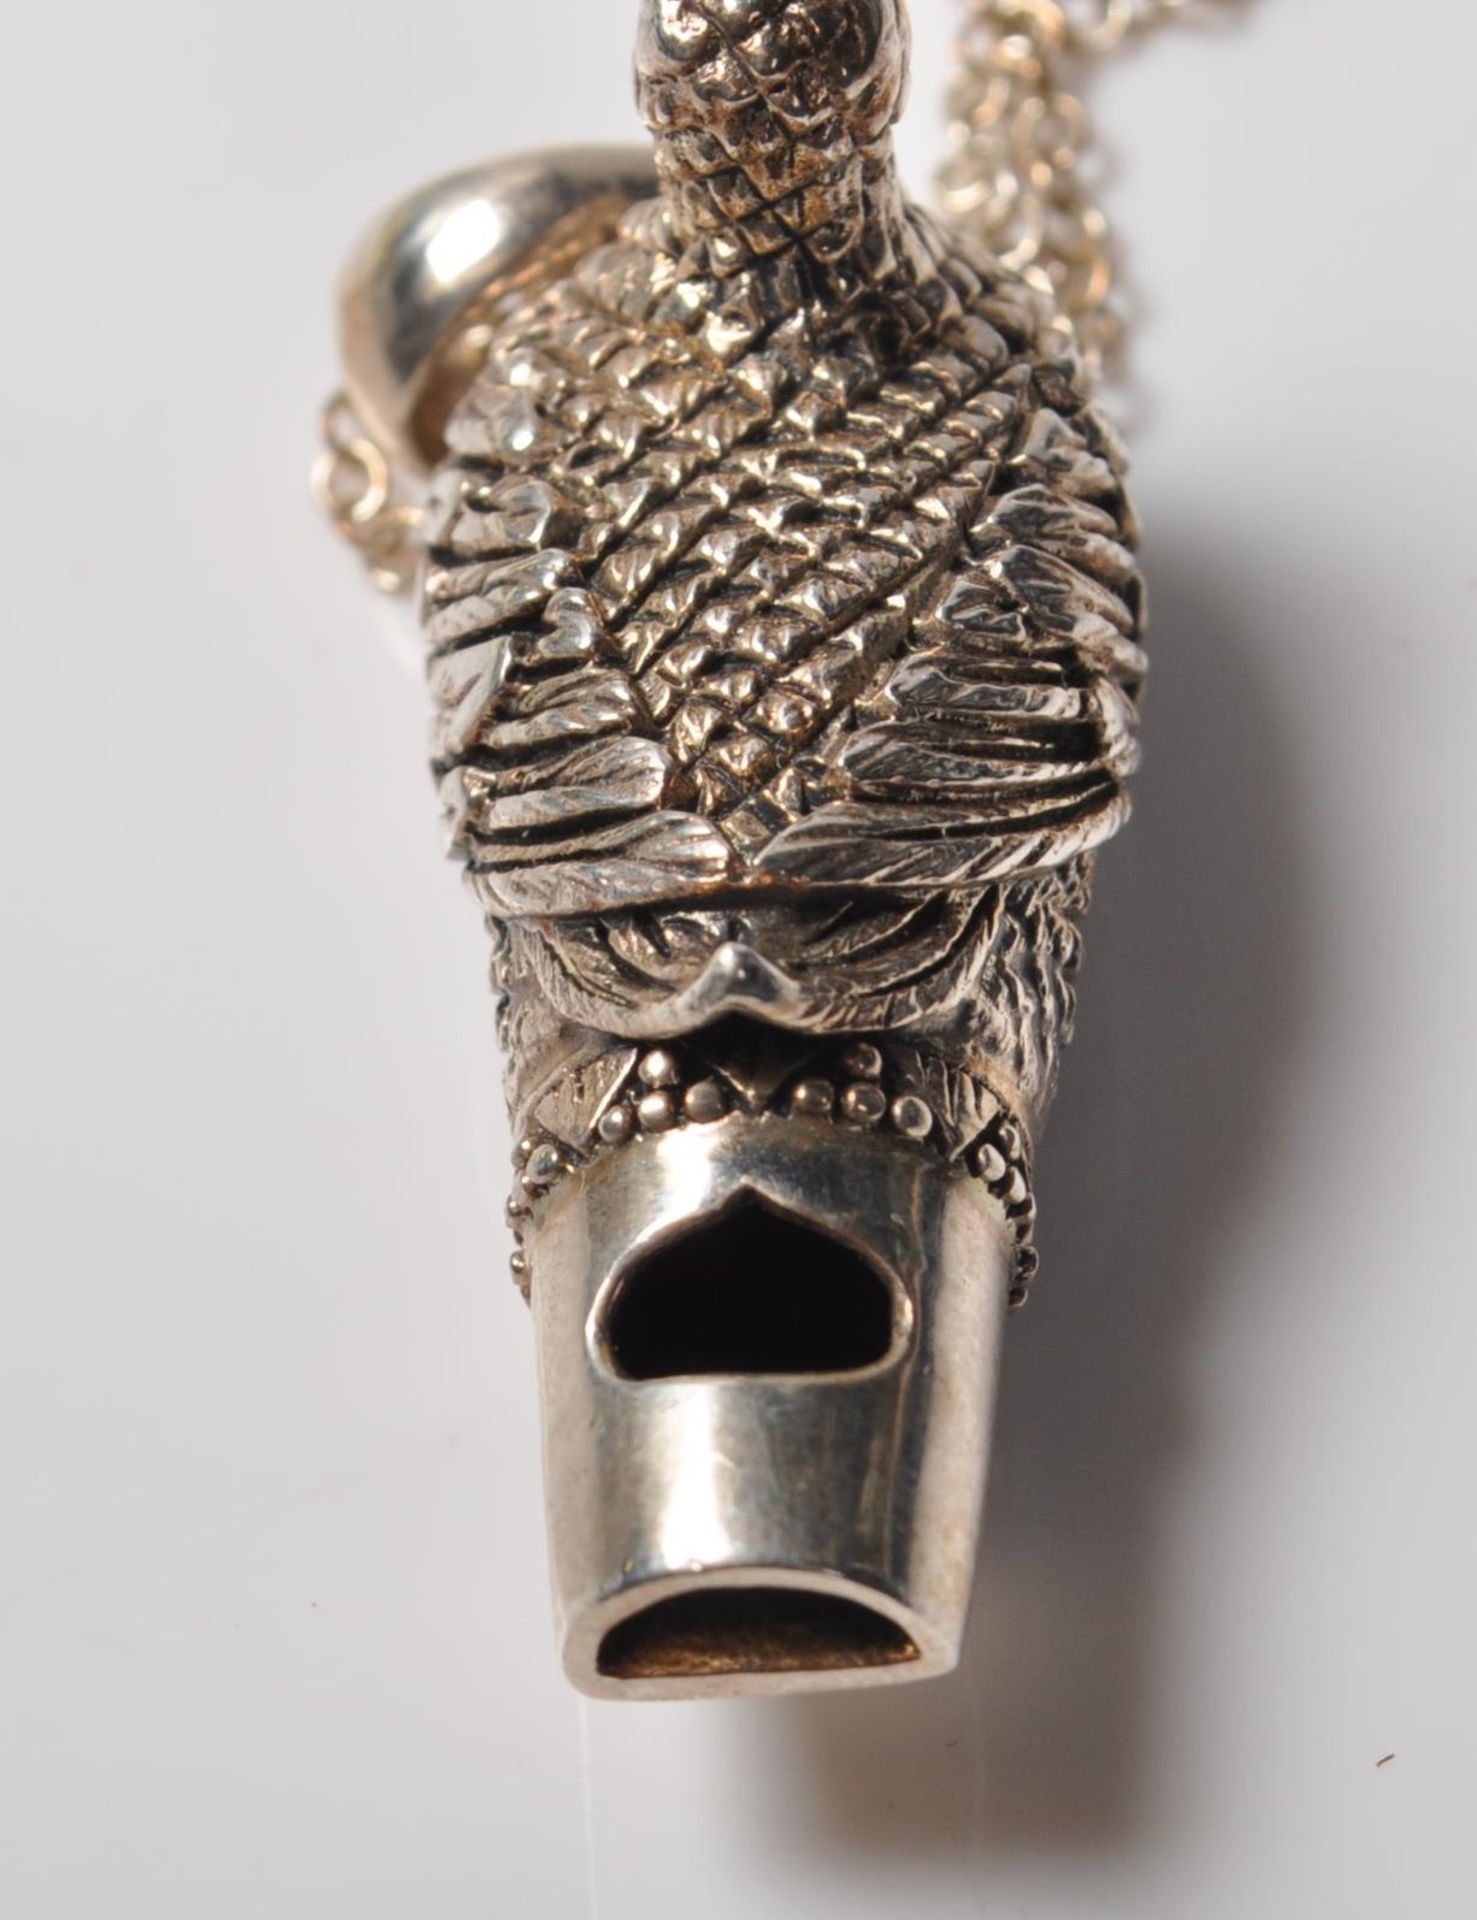 SILVER DUCK WHISTLE PENDANT NECKLACE - Image 5 of 9